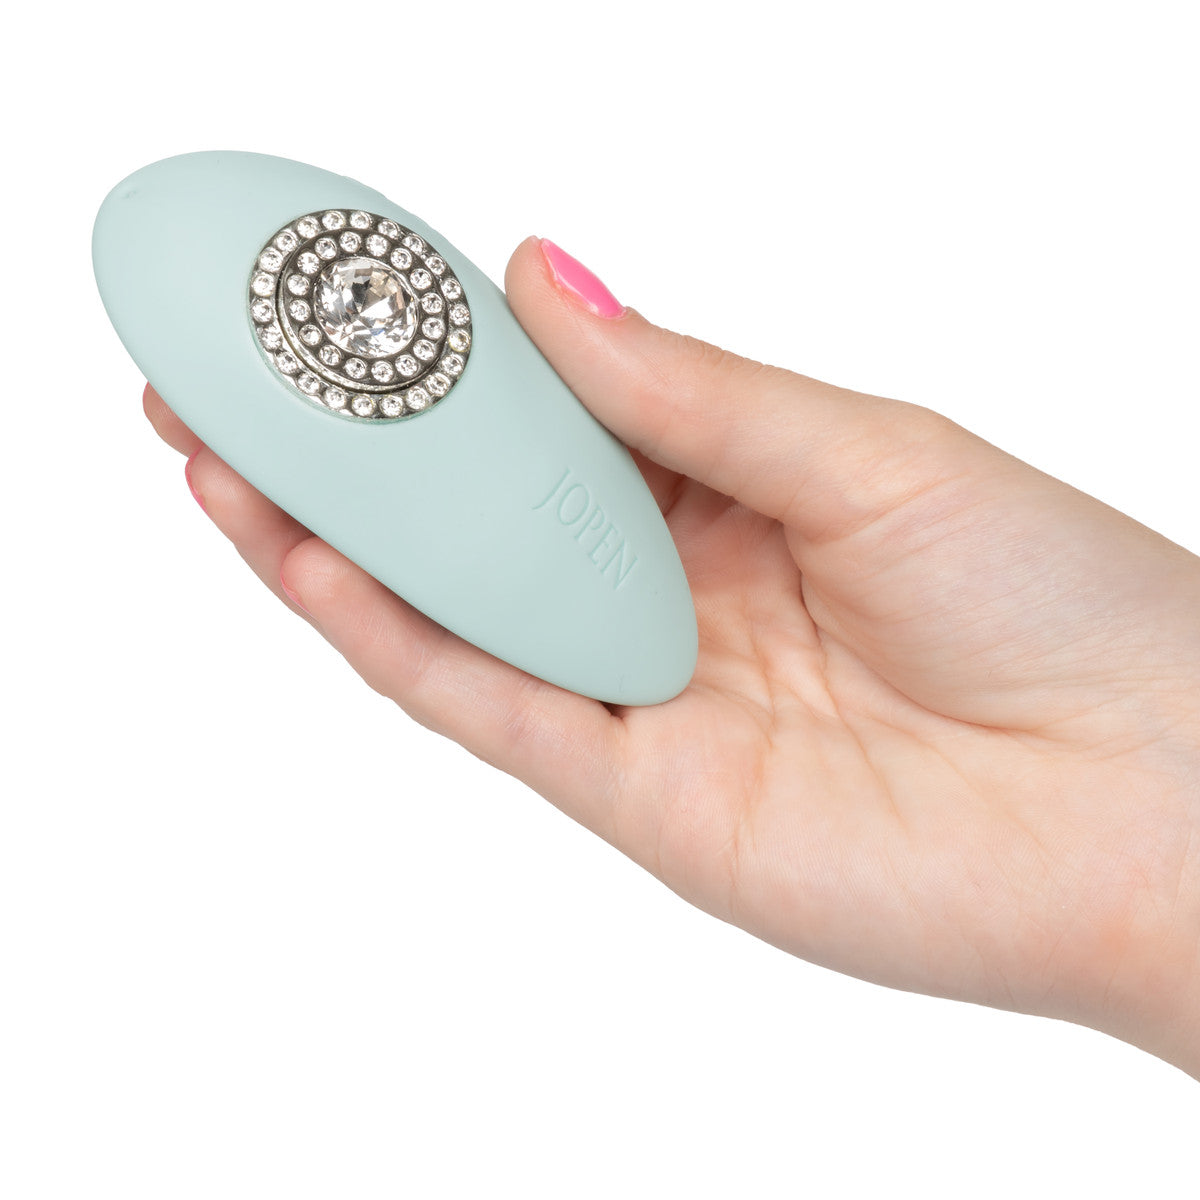 Sparkling Pave Grace Mini Massager W/ 7 Functions Of Vibration  - Club X